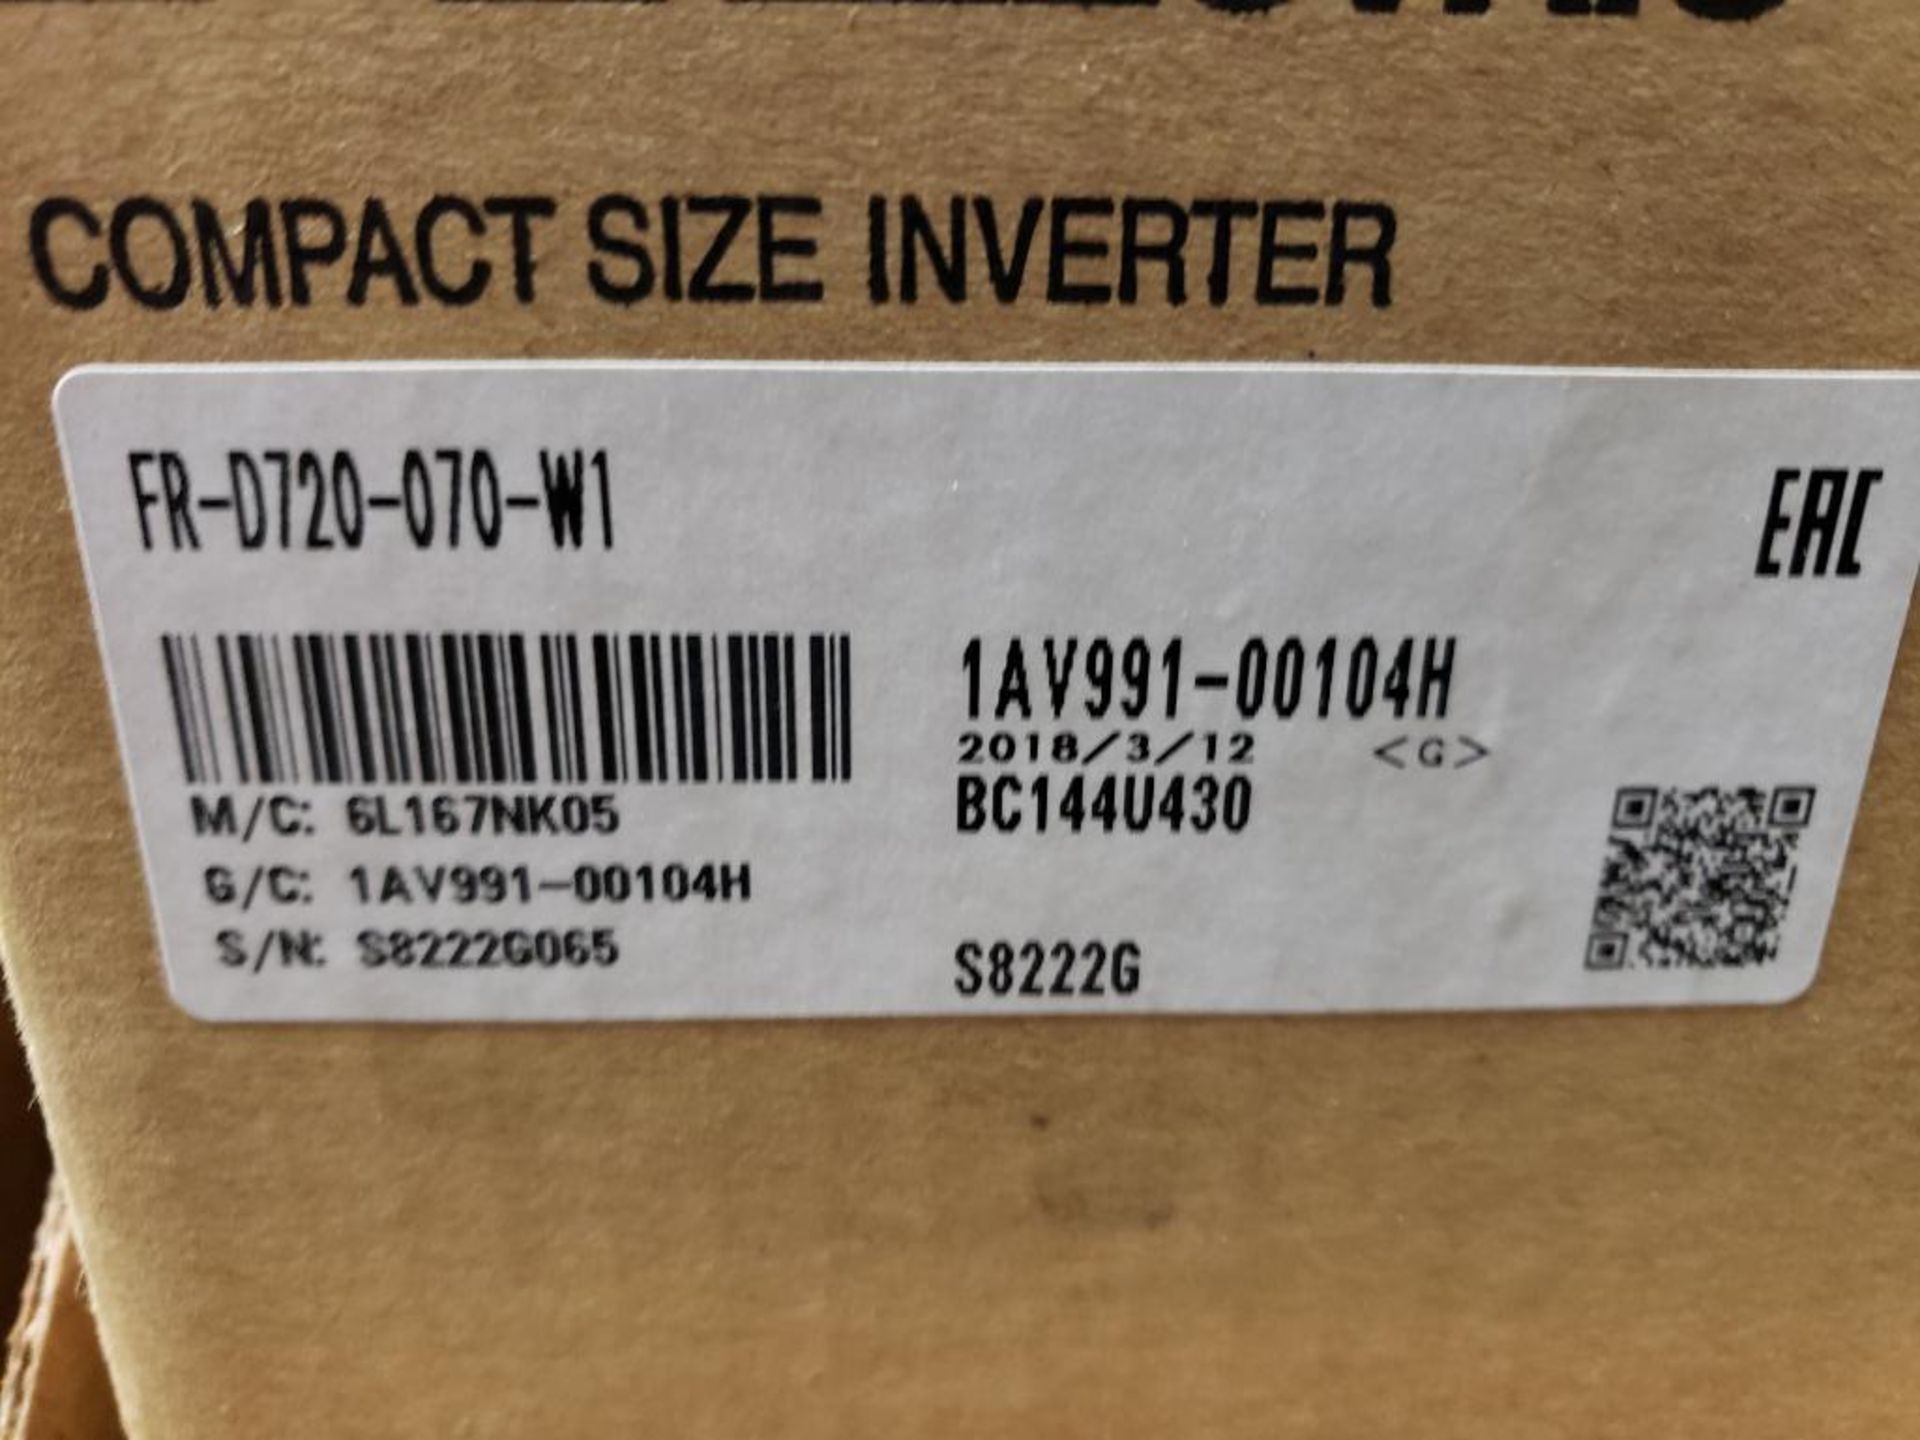 Mitsubishi Electric FR-D720-070-W1 compact size inverter. New in box. - Image 3 of 5